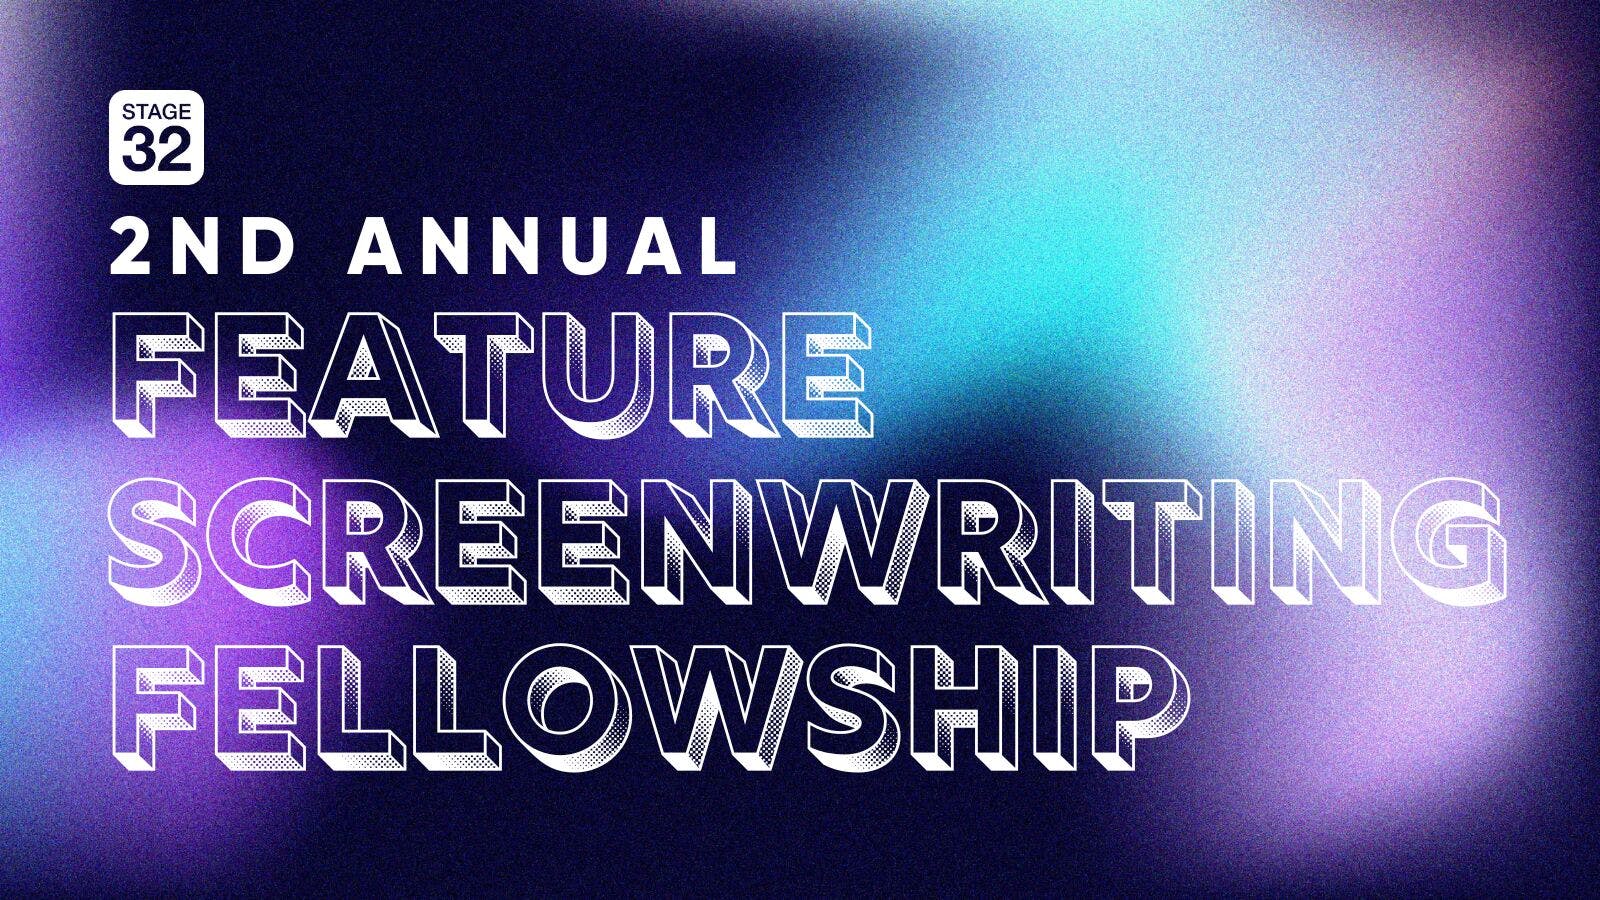 Announcing the 2nd Annual Feature Screenwriting Fellowship Competition